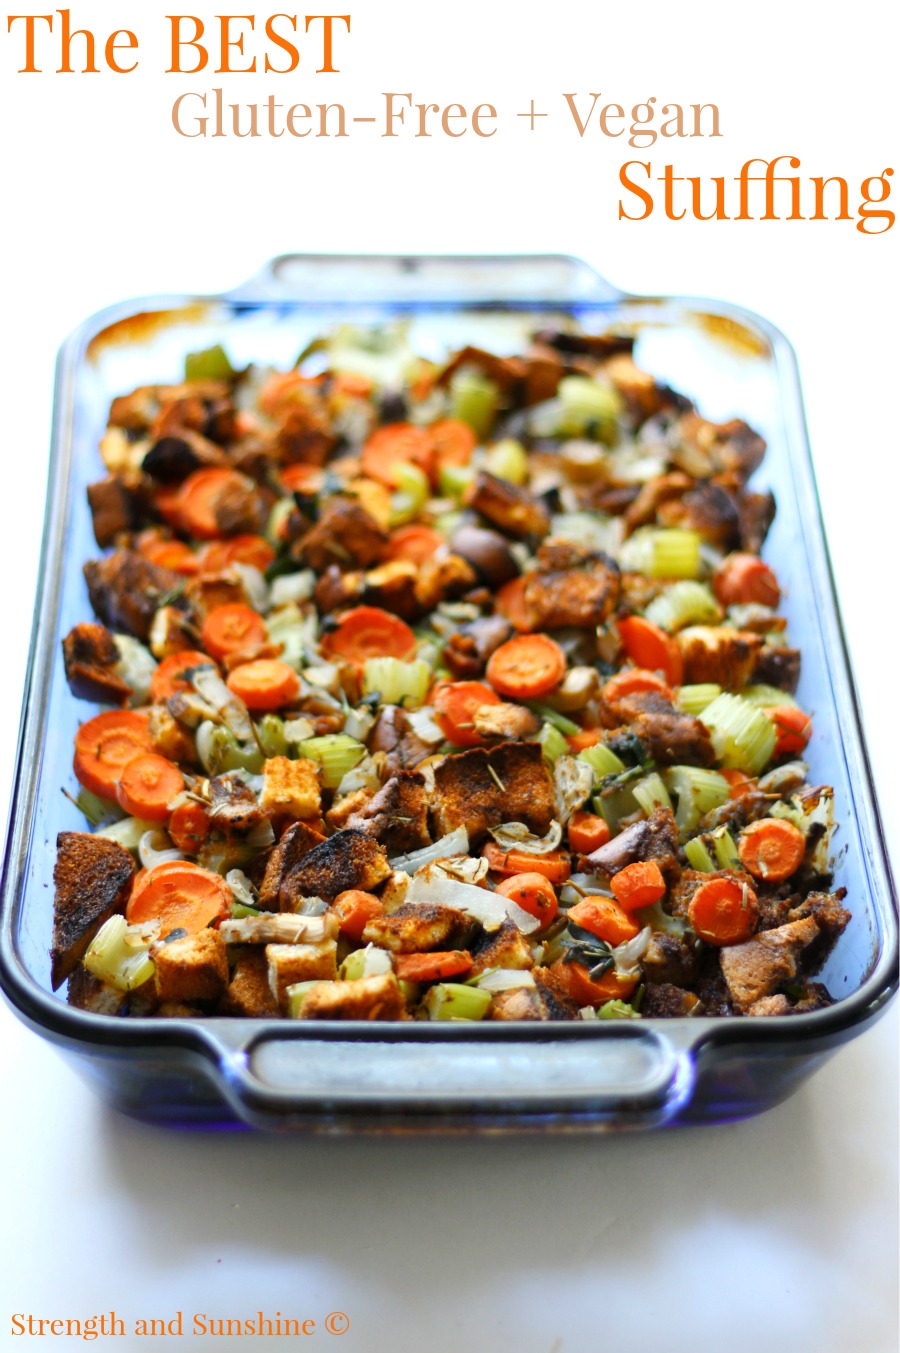 The Best Gluten-Free Vegan Stuffing | Strength and Sunshine @RebeccaGF666 Thanksgiving is never complete without some of The Best Gluten-Free Vegan Stuffing! Impress your guests with this essential side dish recipe that's safe for all food allergies, loved by all, and may just become the new star of the show!